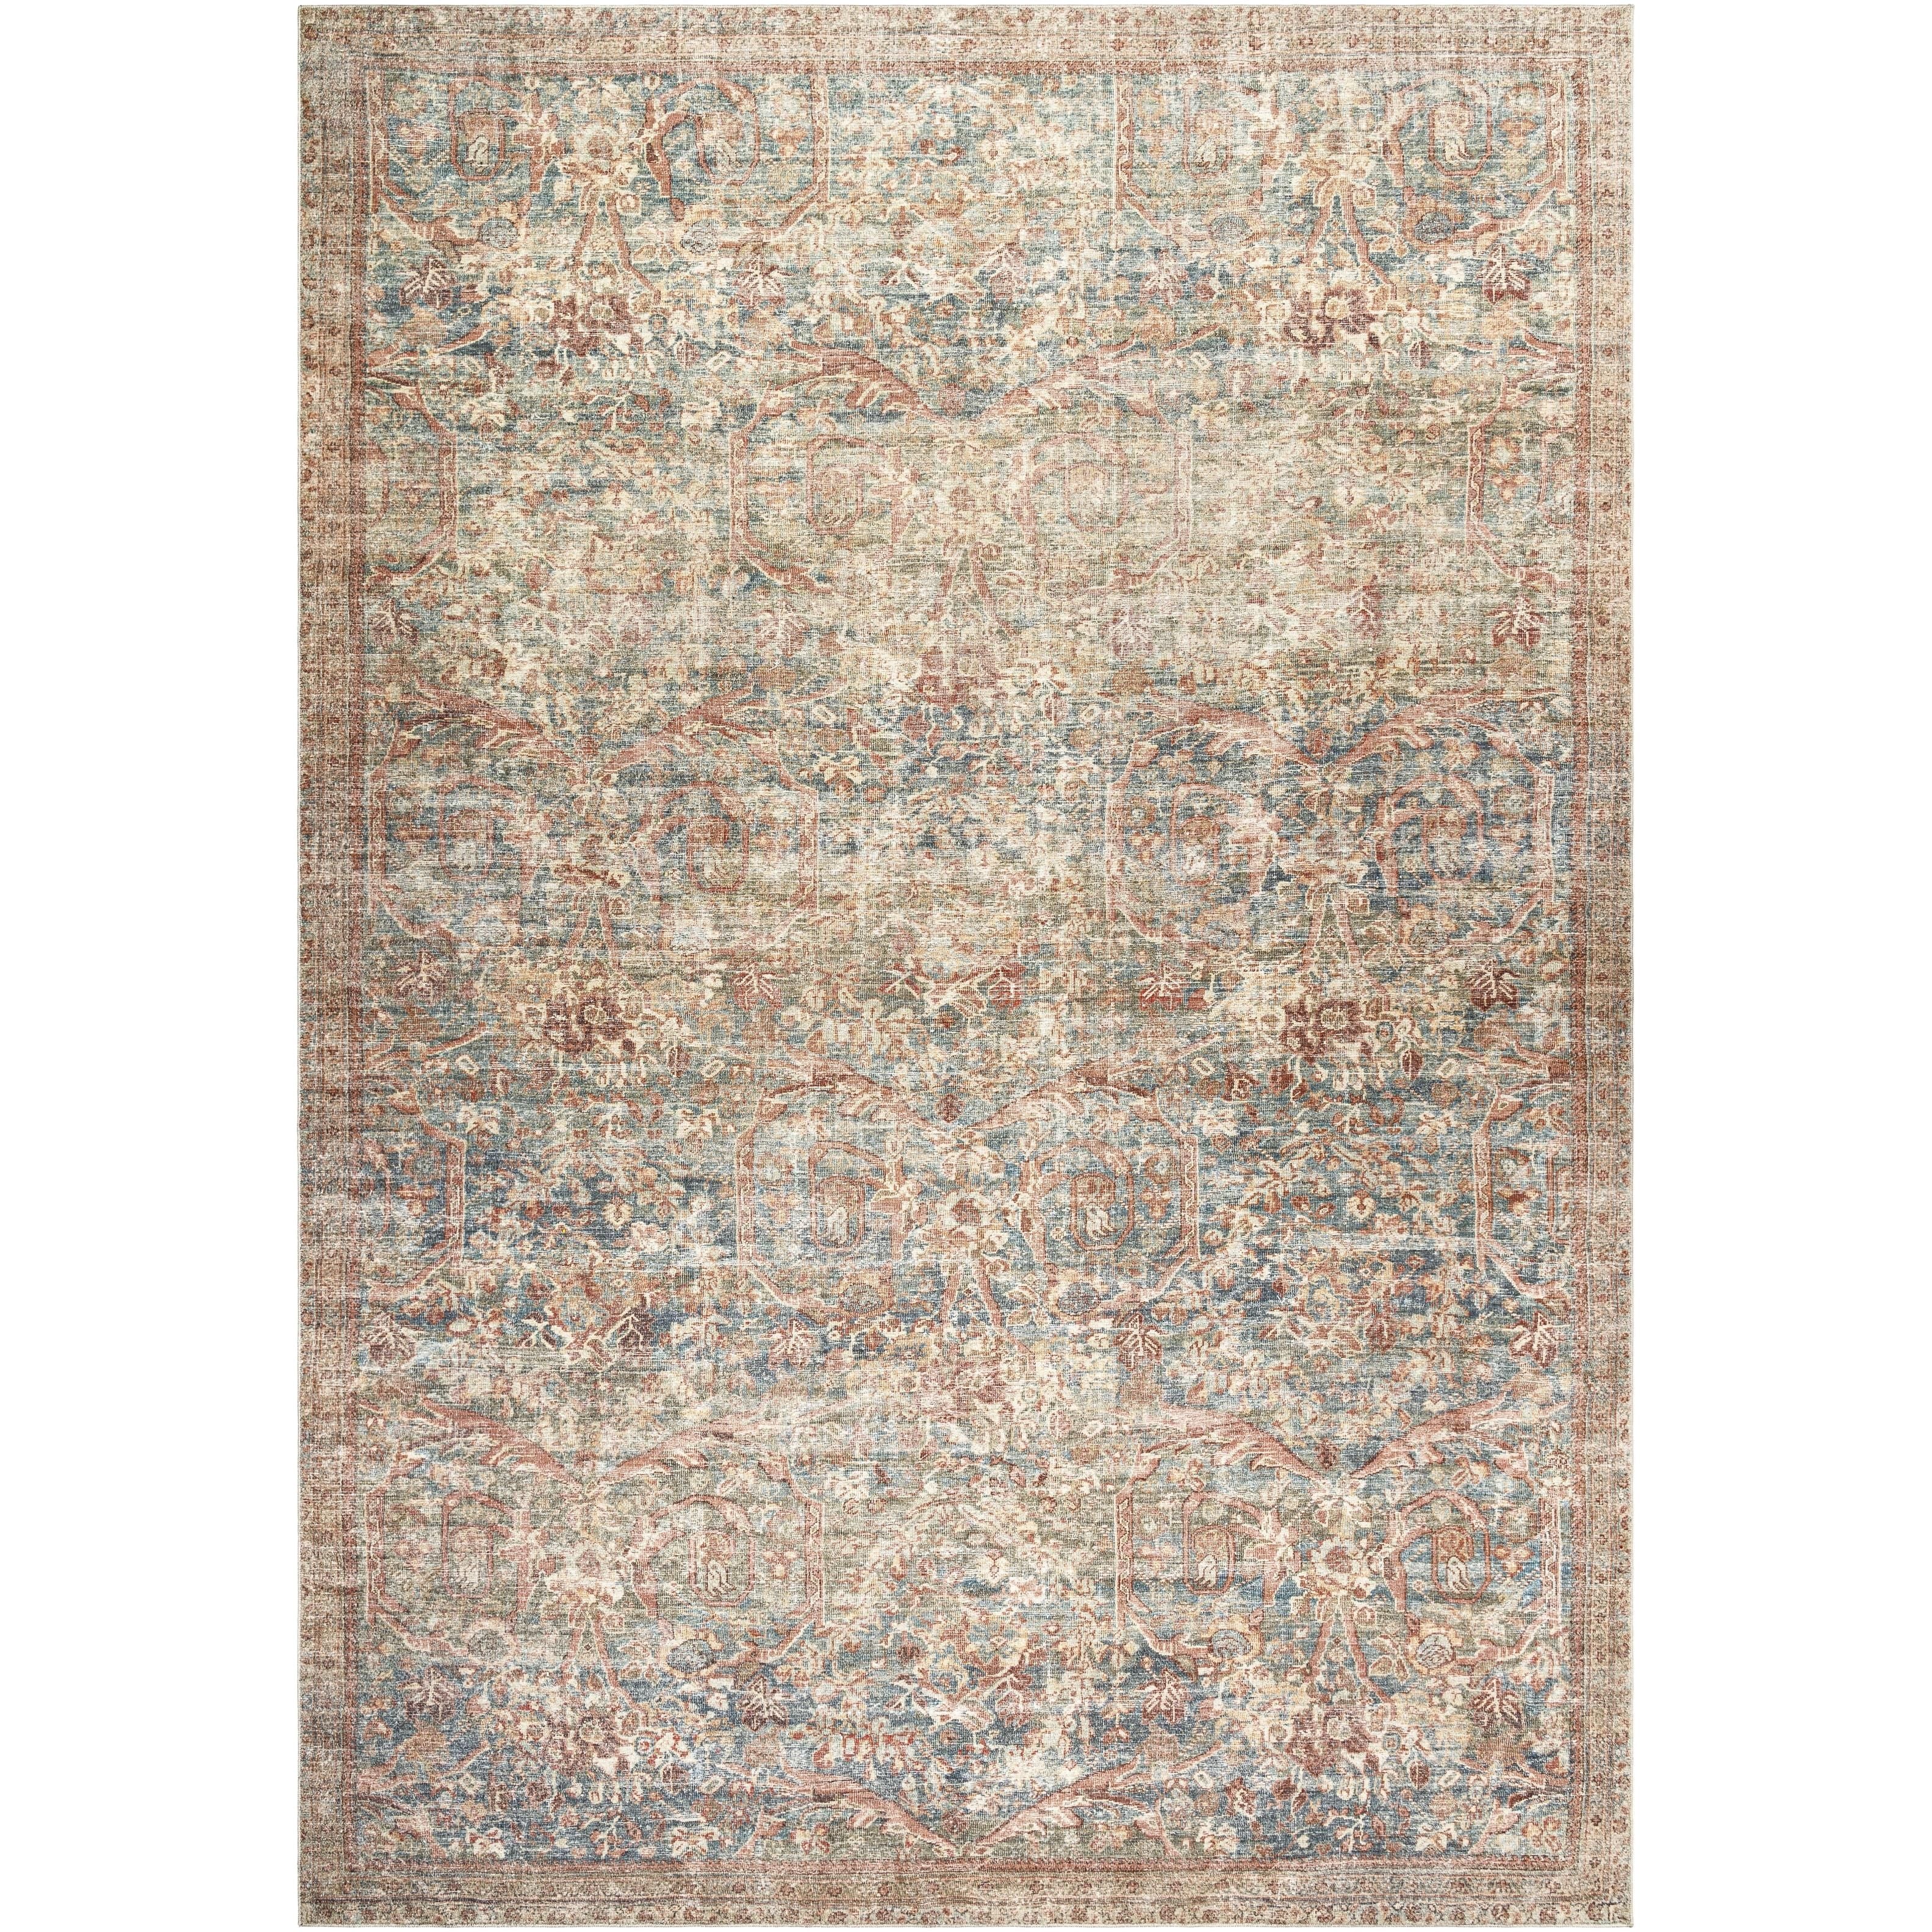 The Marlene area rug is the perfect addition to any living space. Crafted as part of our special collaboration from the Becki Owens x Surya line, this stunning piece is sure to bring a vintage-inspired flair to your home. Amethyst Home provides interior design, new home construction design consulting, vintage area rugs, and lighting in the Portland metro area.